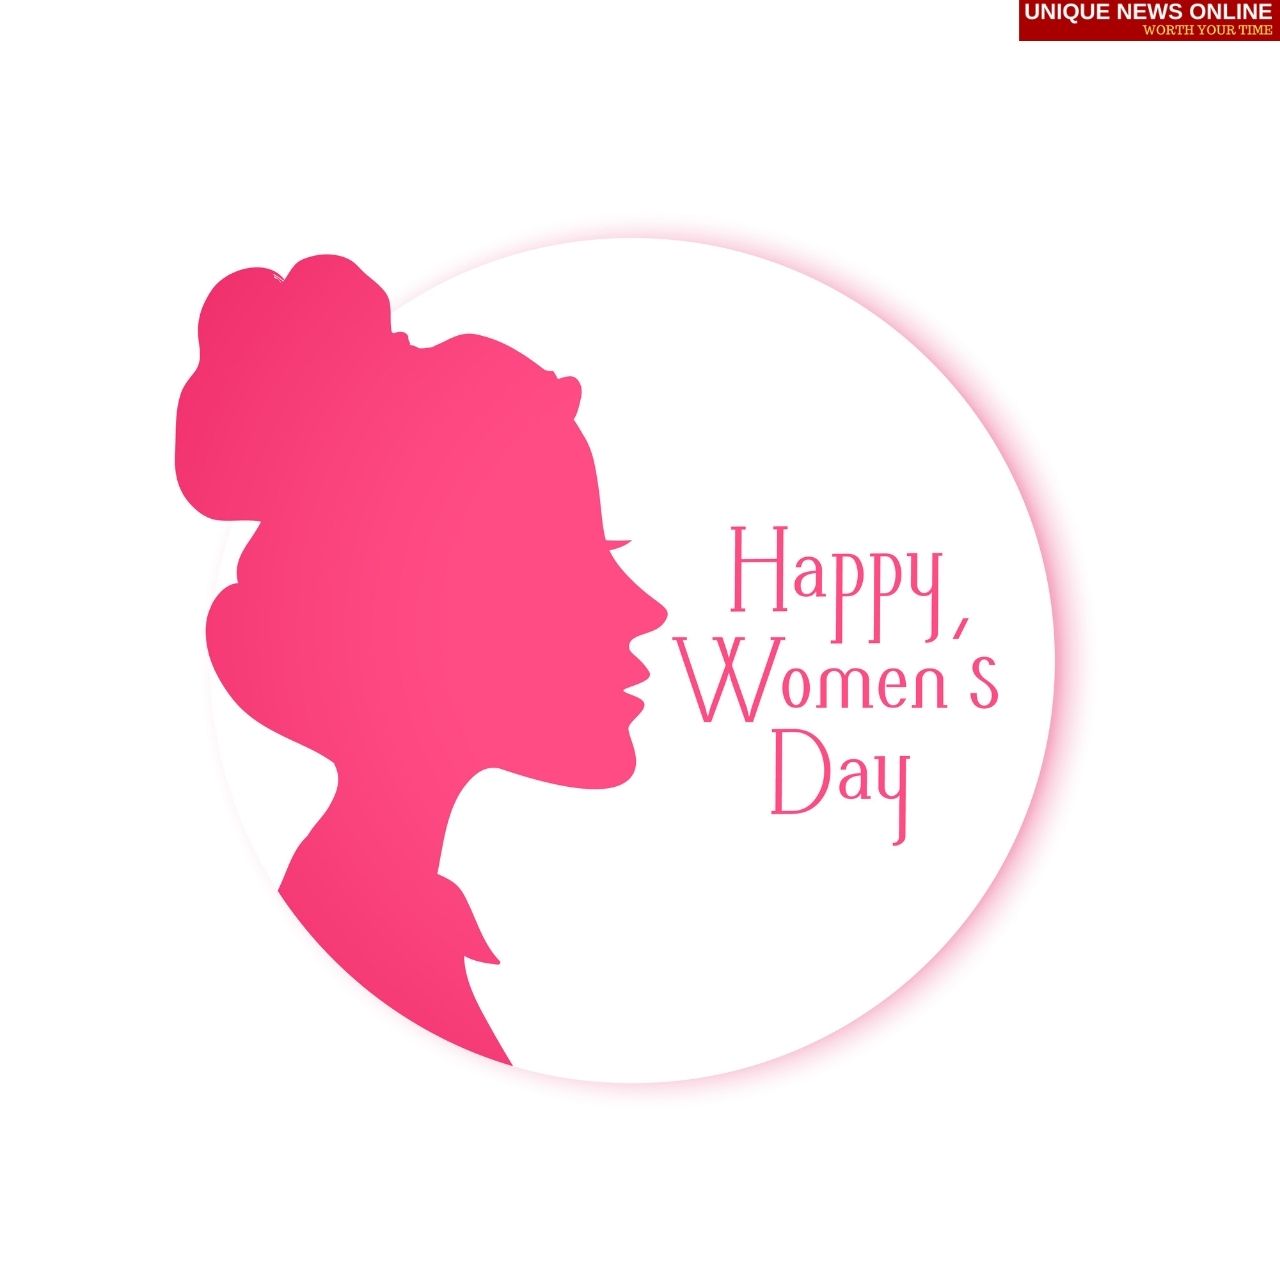 Happy Women's Day 2022 Quotes, Wishes, Greetings, HD Images, Messages for Mother